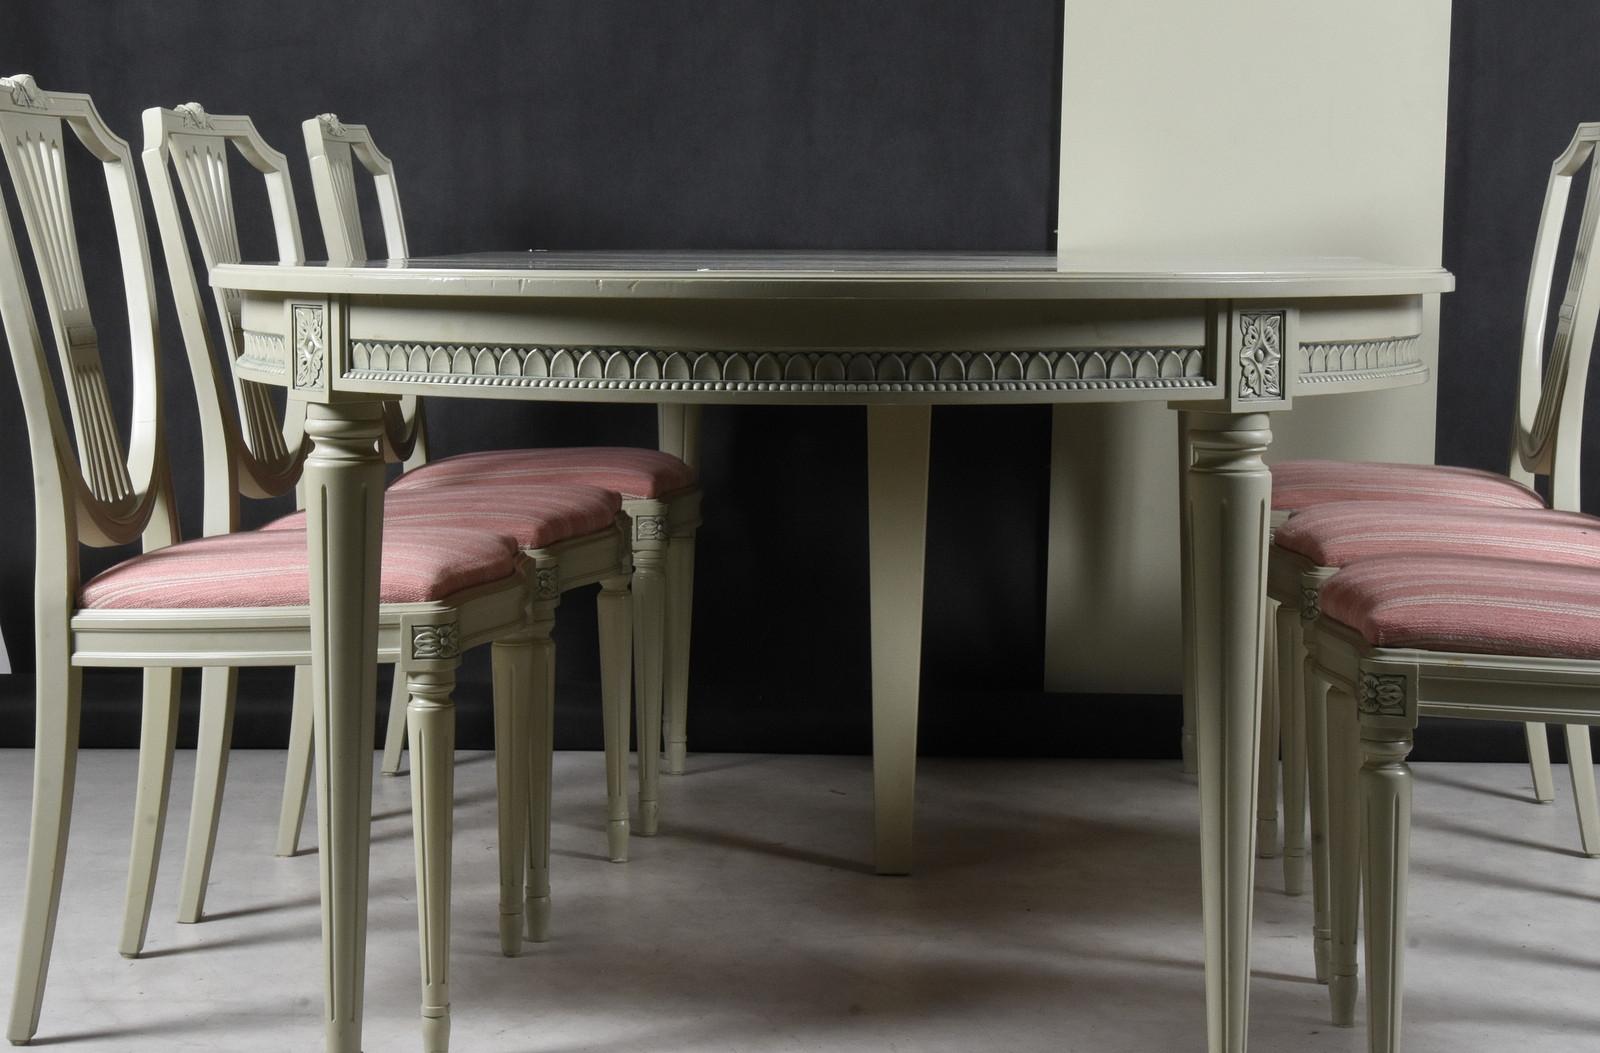 Swedish vintage Gustavian extendable dining table which extends from 114 cm approximate in the round to 270cm long with three leaves. 

It has the Classic Gustavian fluted legs and rosettes and unusually egg and dart frieze going around the table